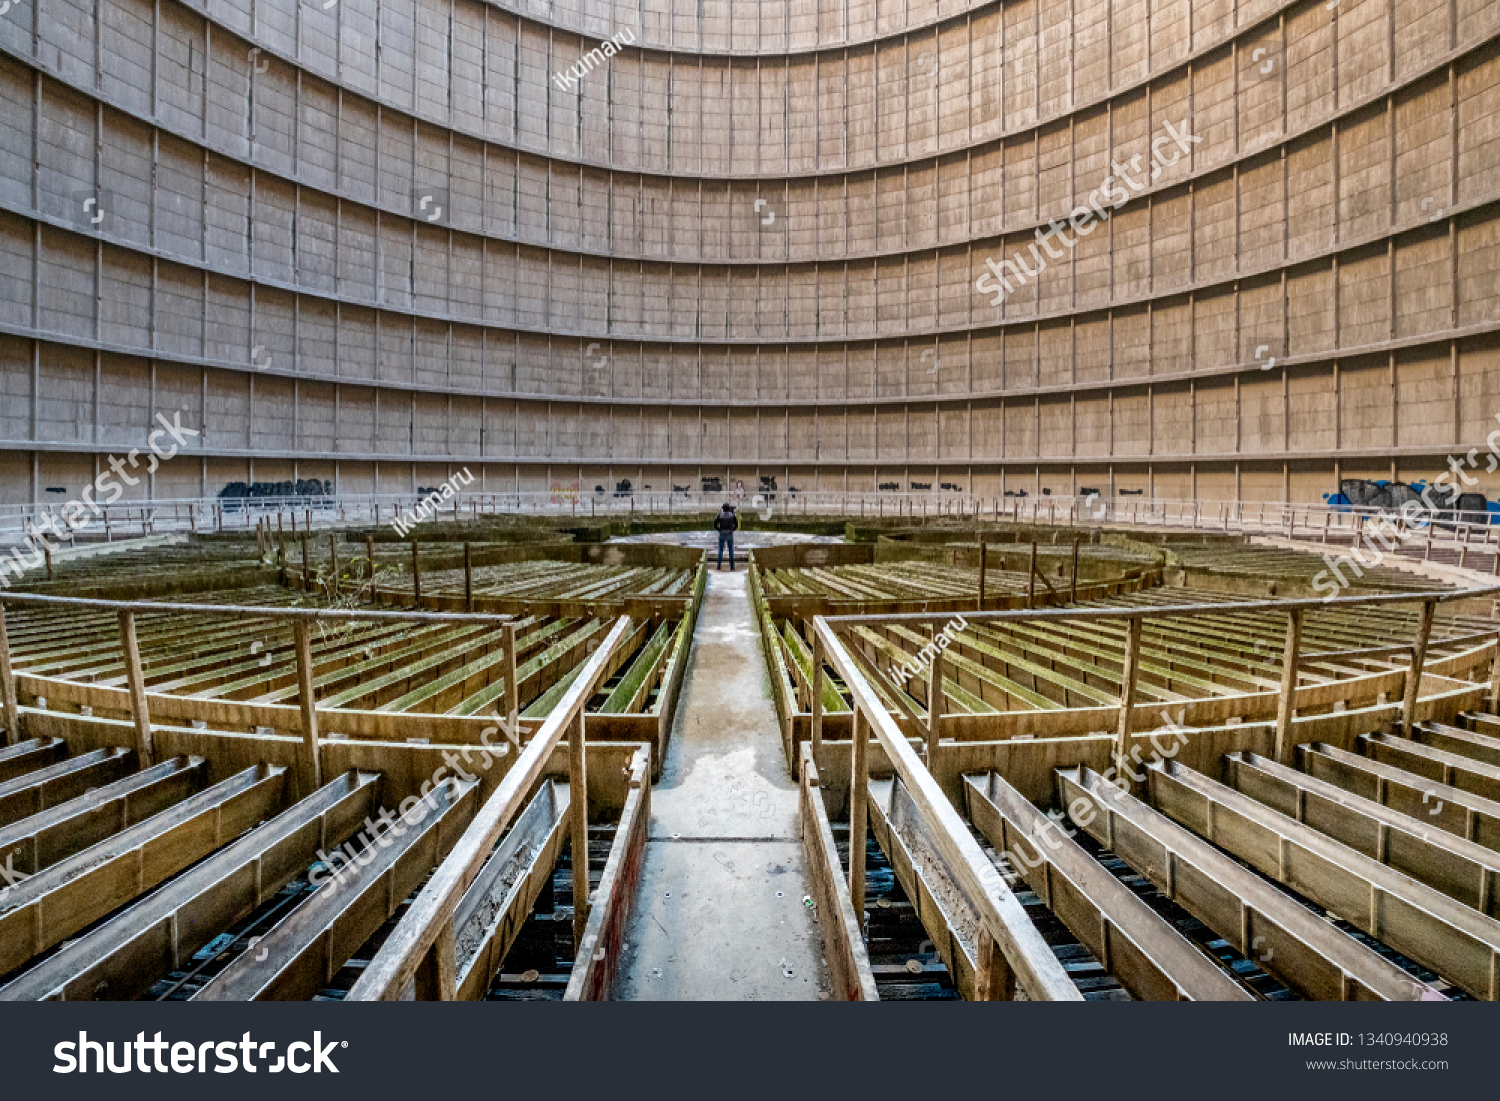 Charleroi, Belgium - 02 13 2019: Interior architecture view of a abandoned cooling tower in power plant of charleroi in Belgium #1340940938